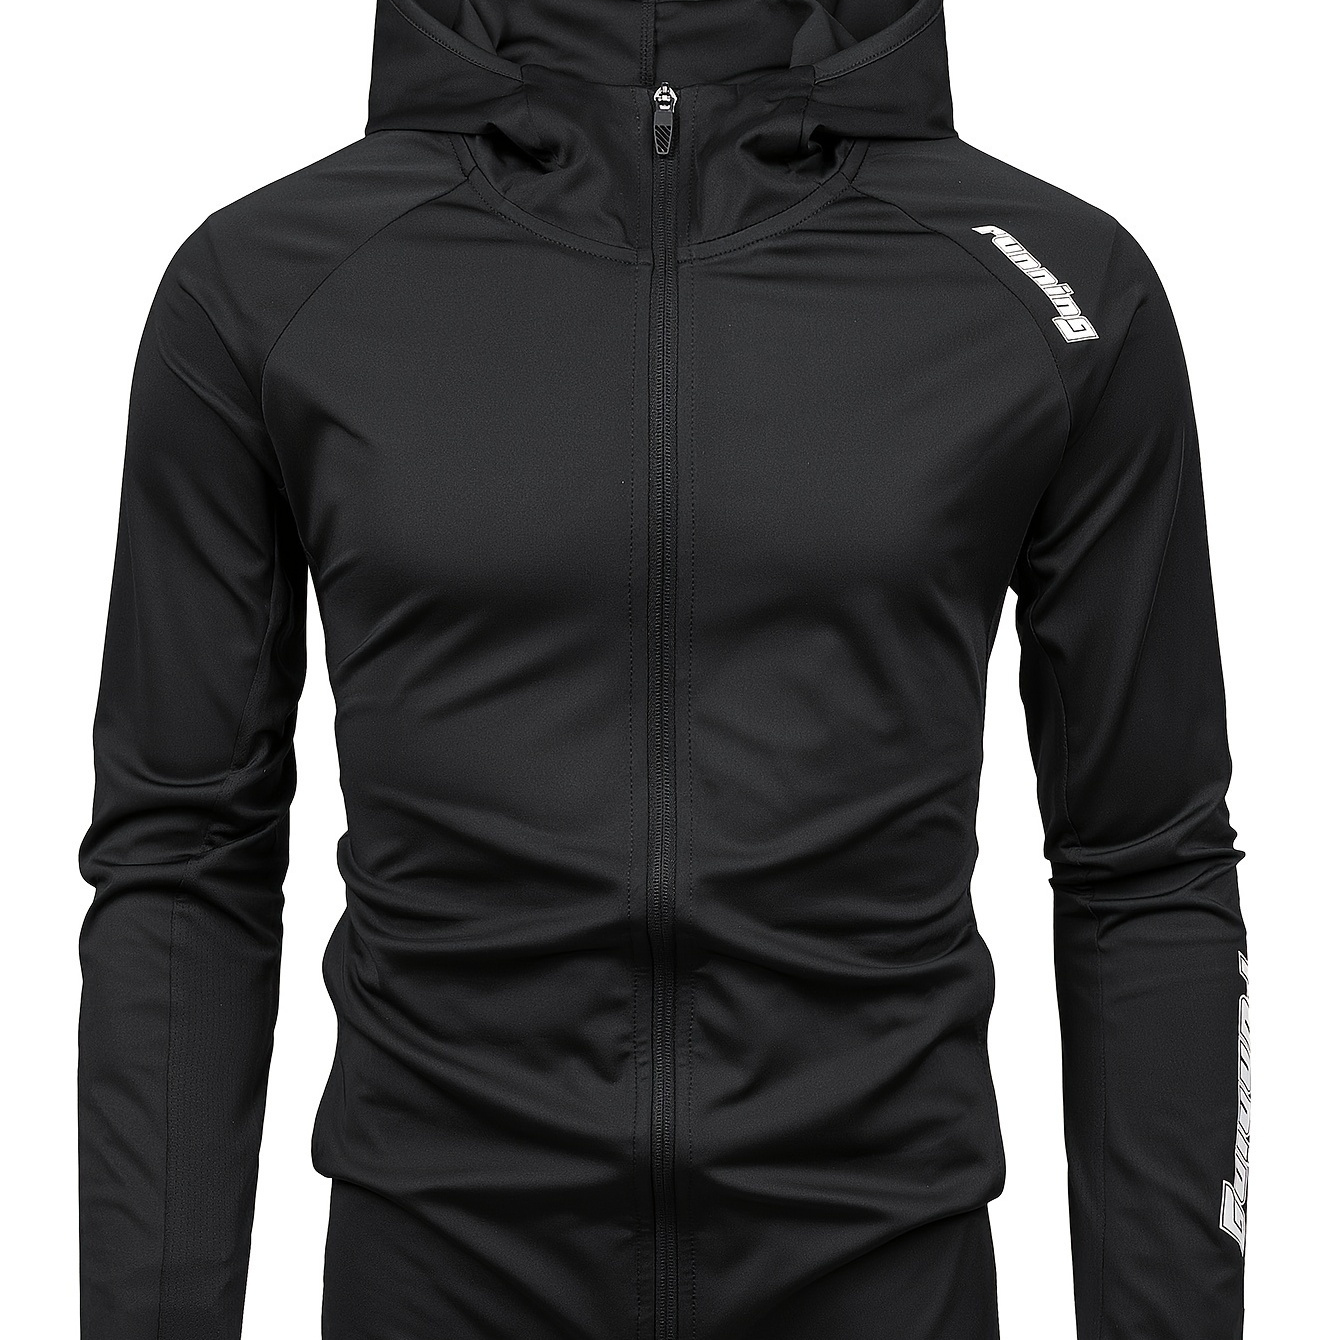 

Men's Full-zip Athletic Hoodies For Spring And Autumn Outdoors Or Daily Wear